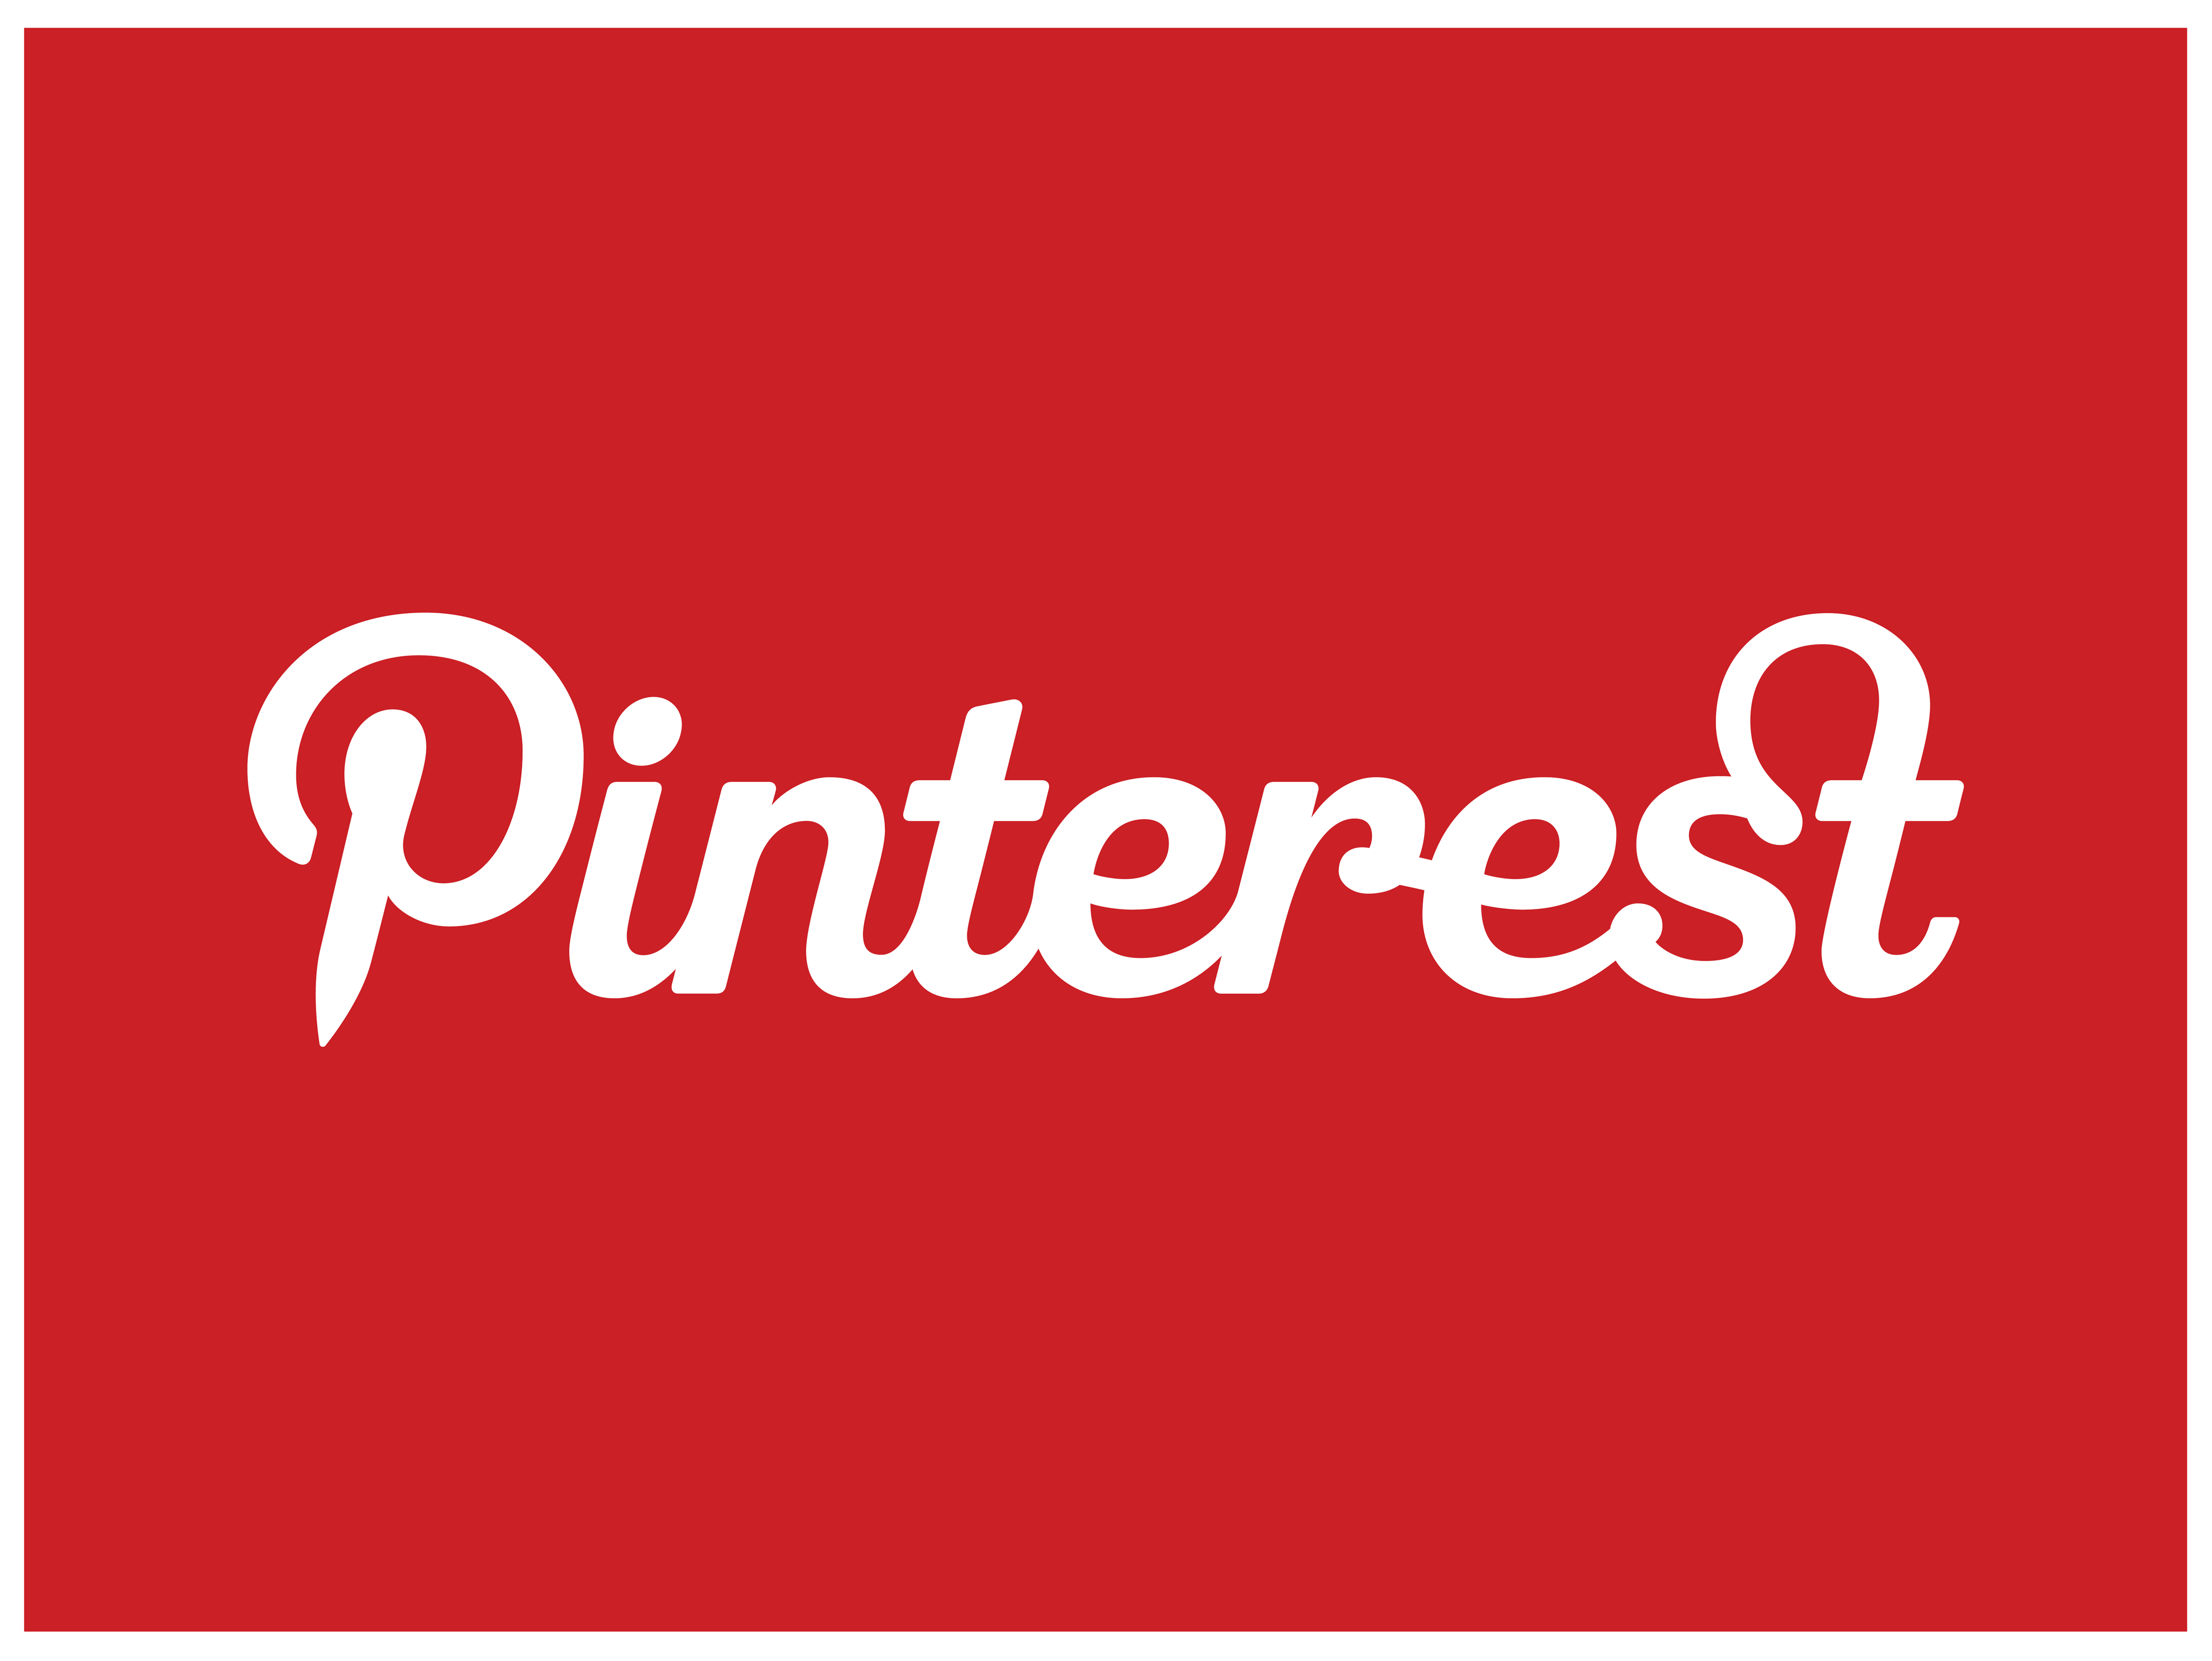 How Pinterest went from zero to the 35th most popular websites in the world